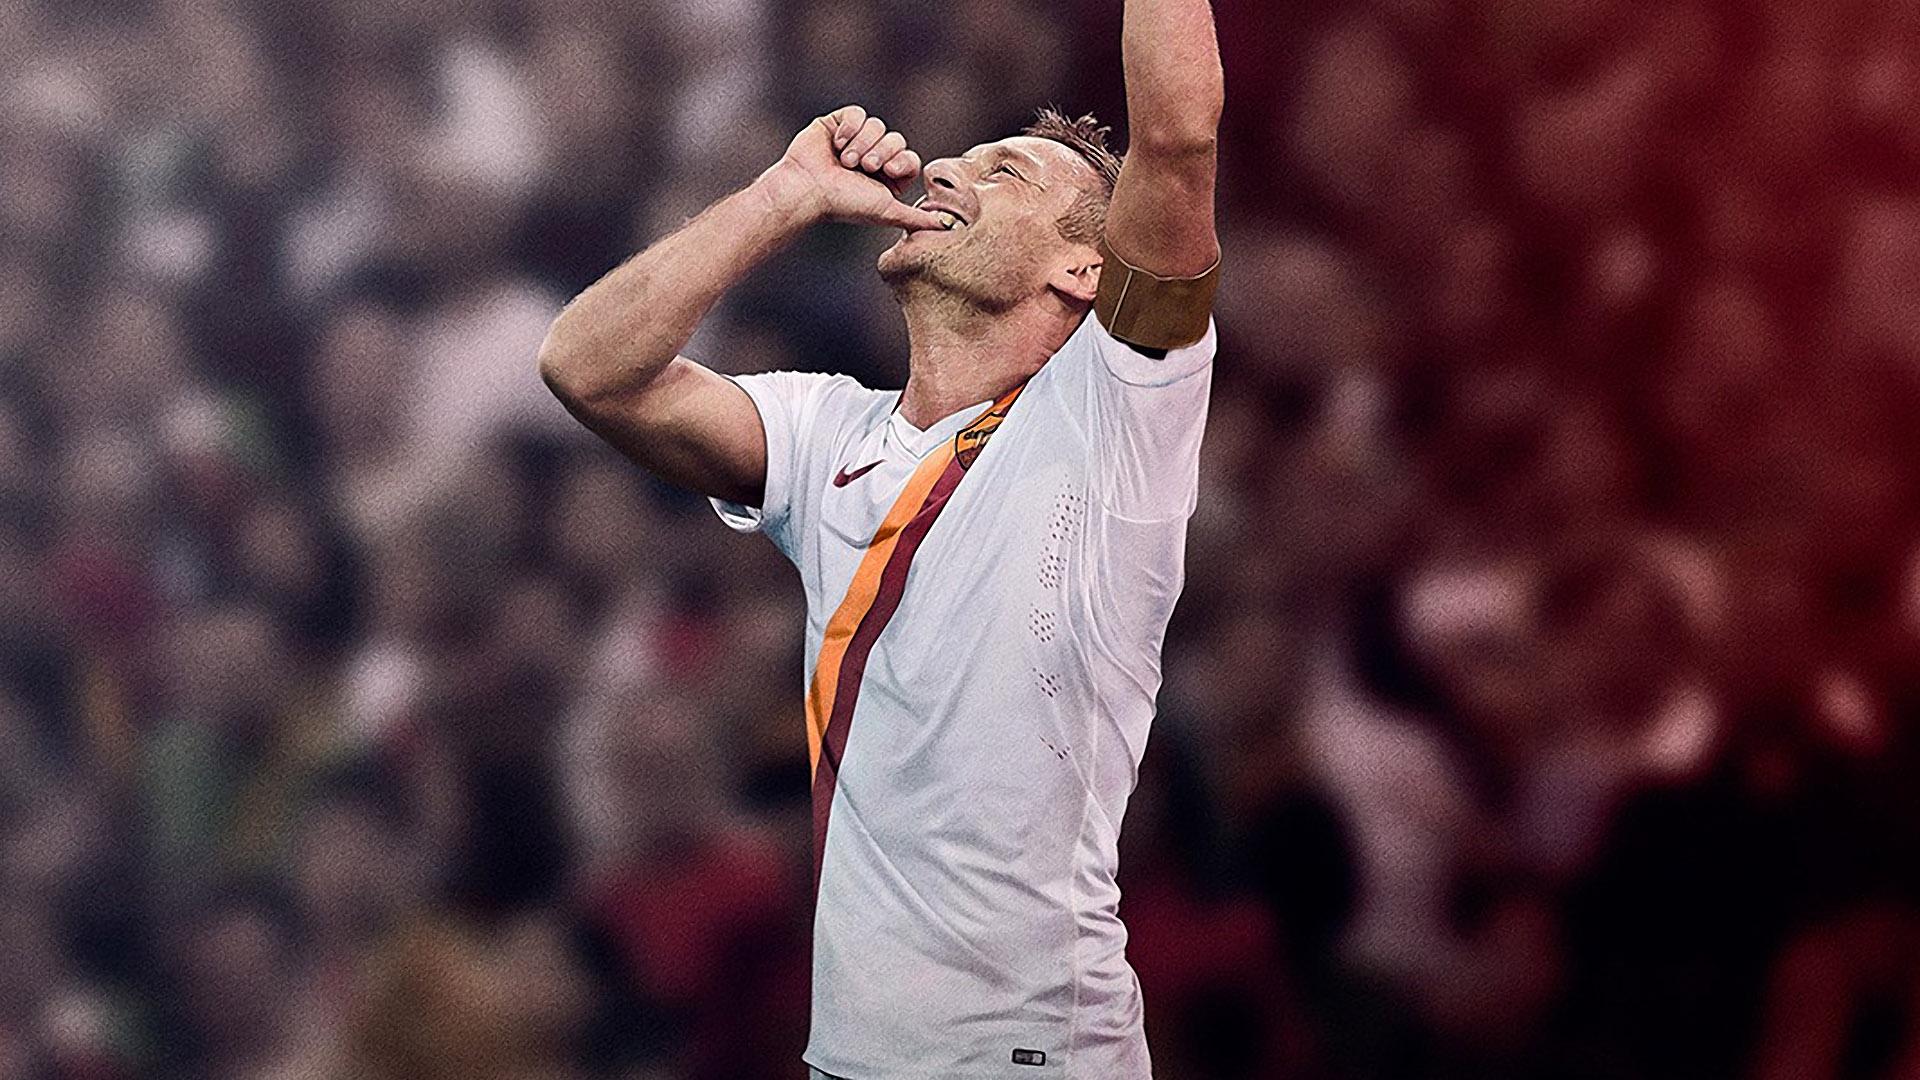 Happy 38th Birthday to "The Emperor", Francesco Totti! Will always be one of my faves and one of the best ever. 